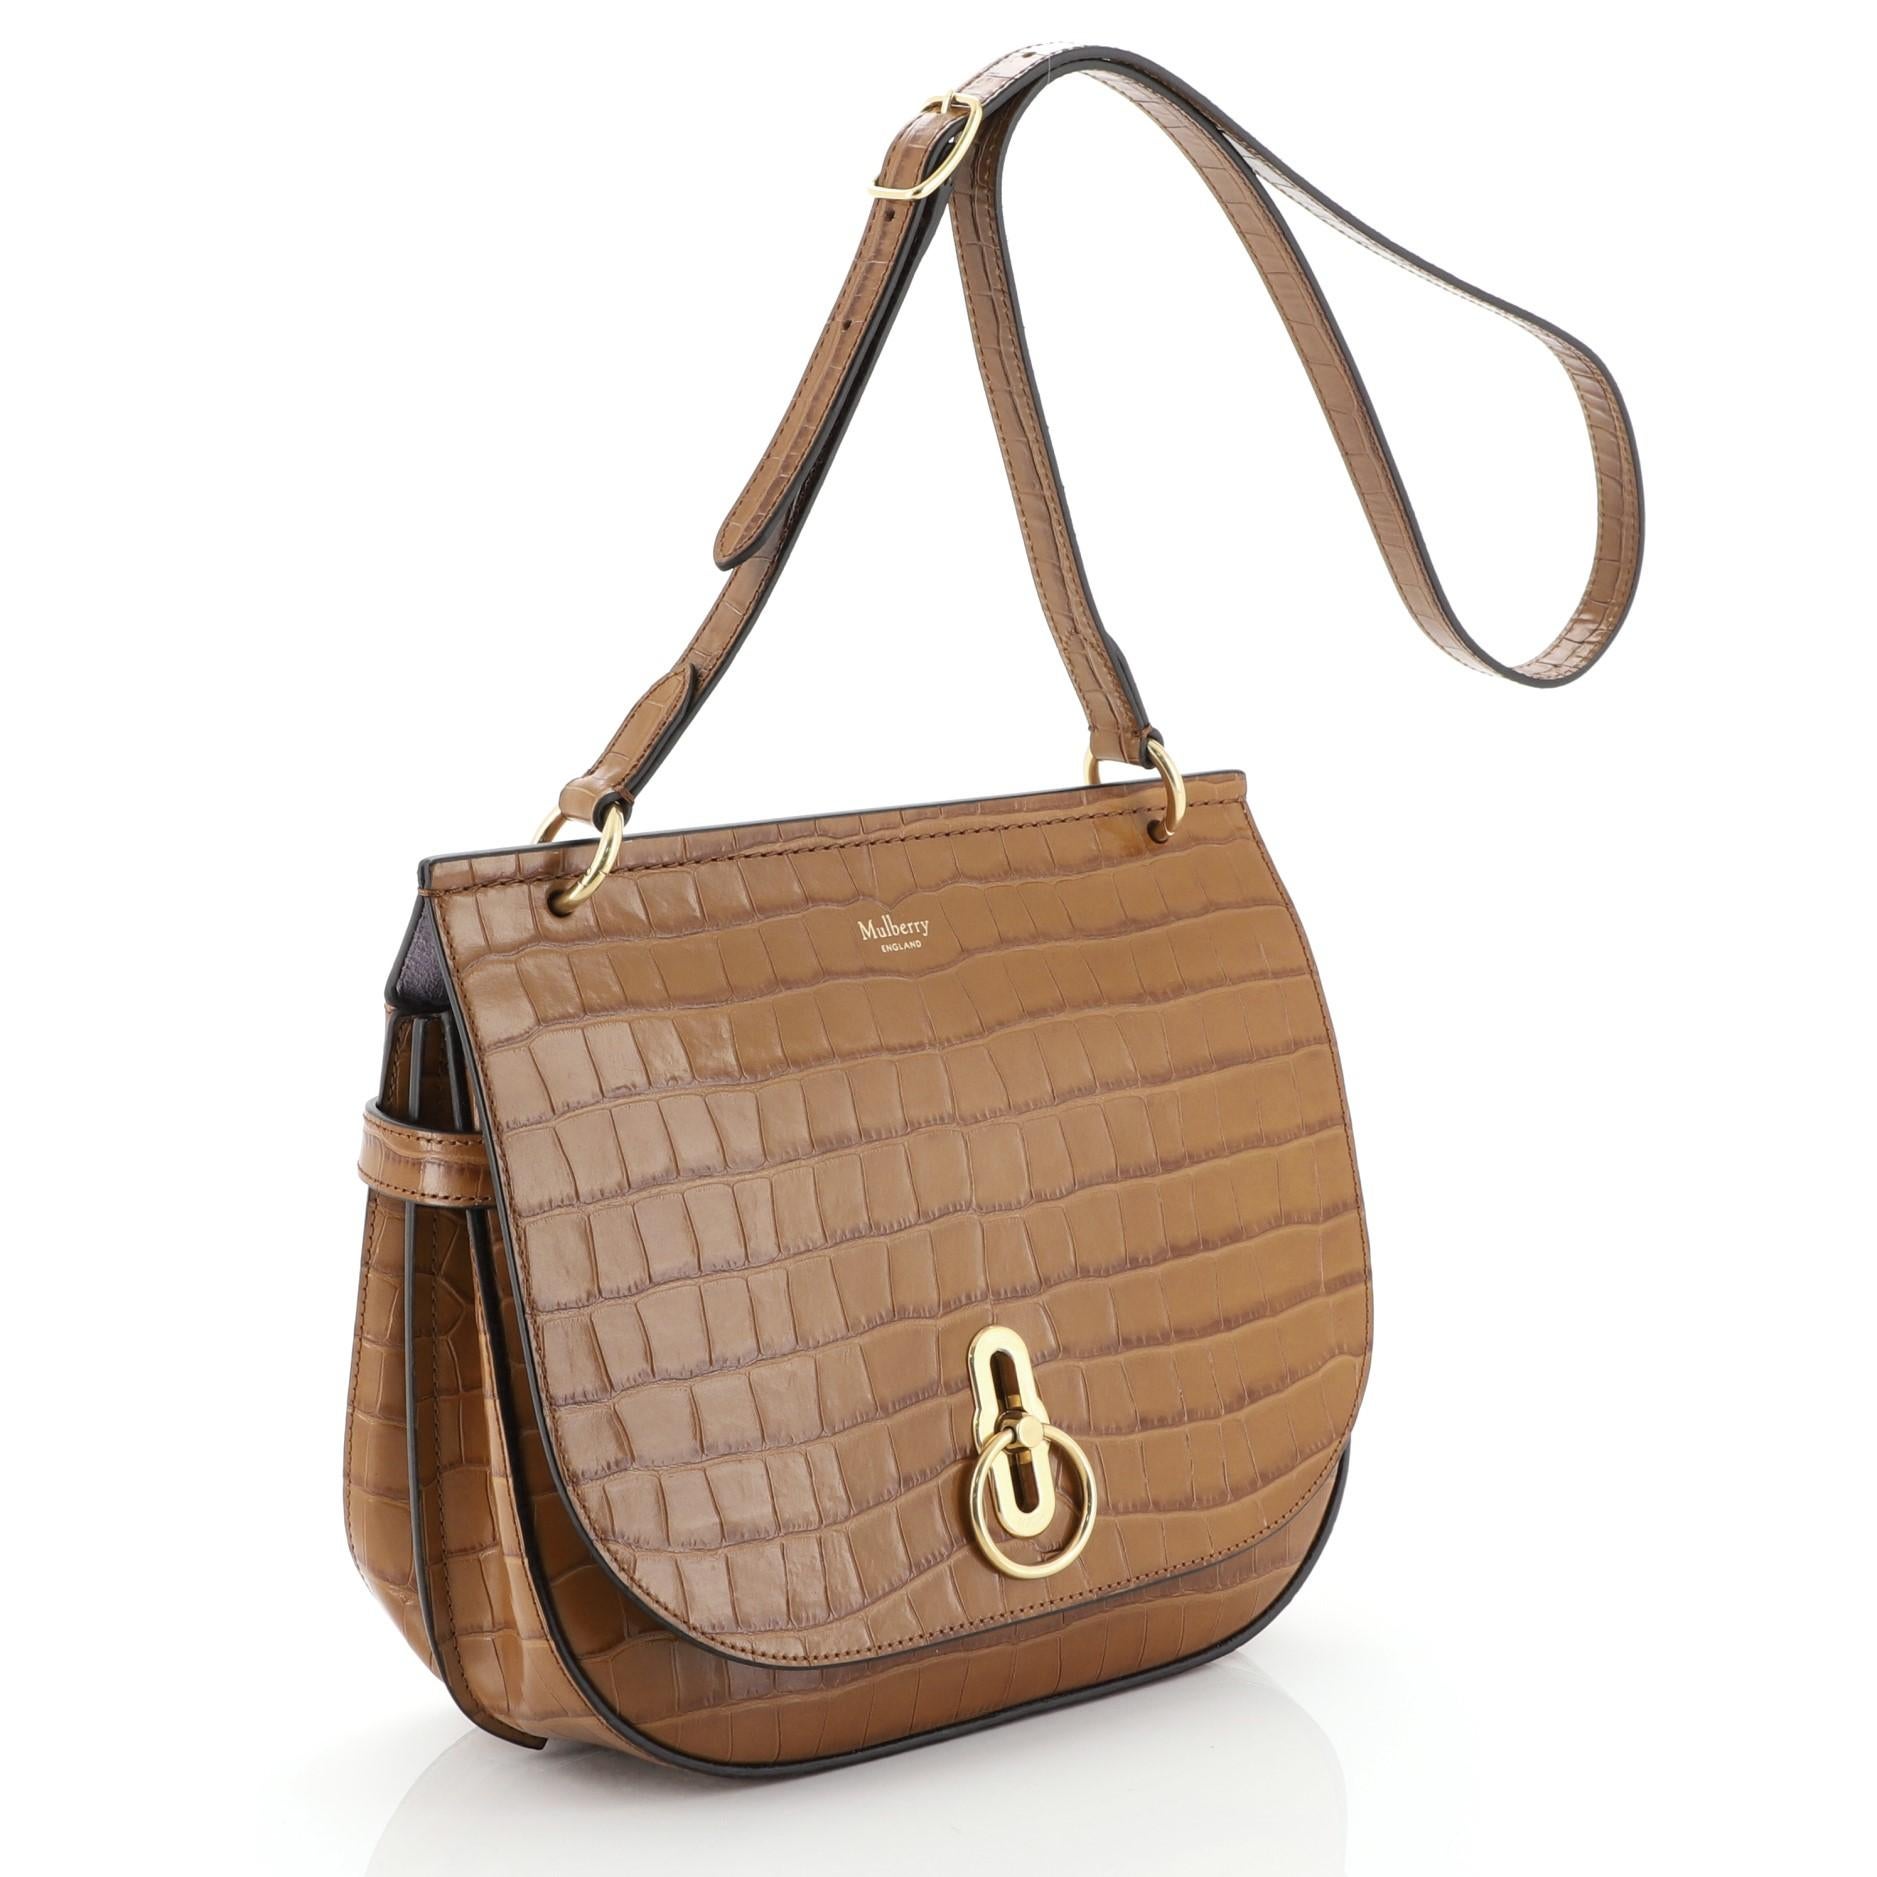 This Mulberry Amberley Crossbody Bag Crocodile Embossed Leather Medium, crafted in brown crocodile-embossed leather, features an adjustable shoulder strap, and matte gold-tone hardware. Its turn-lock closure opens to a purple suede